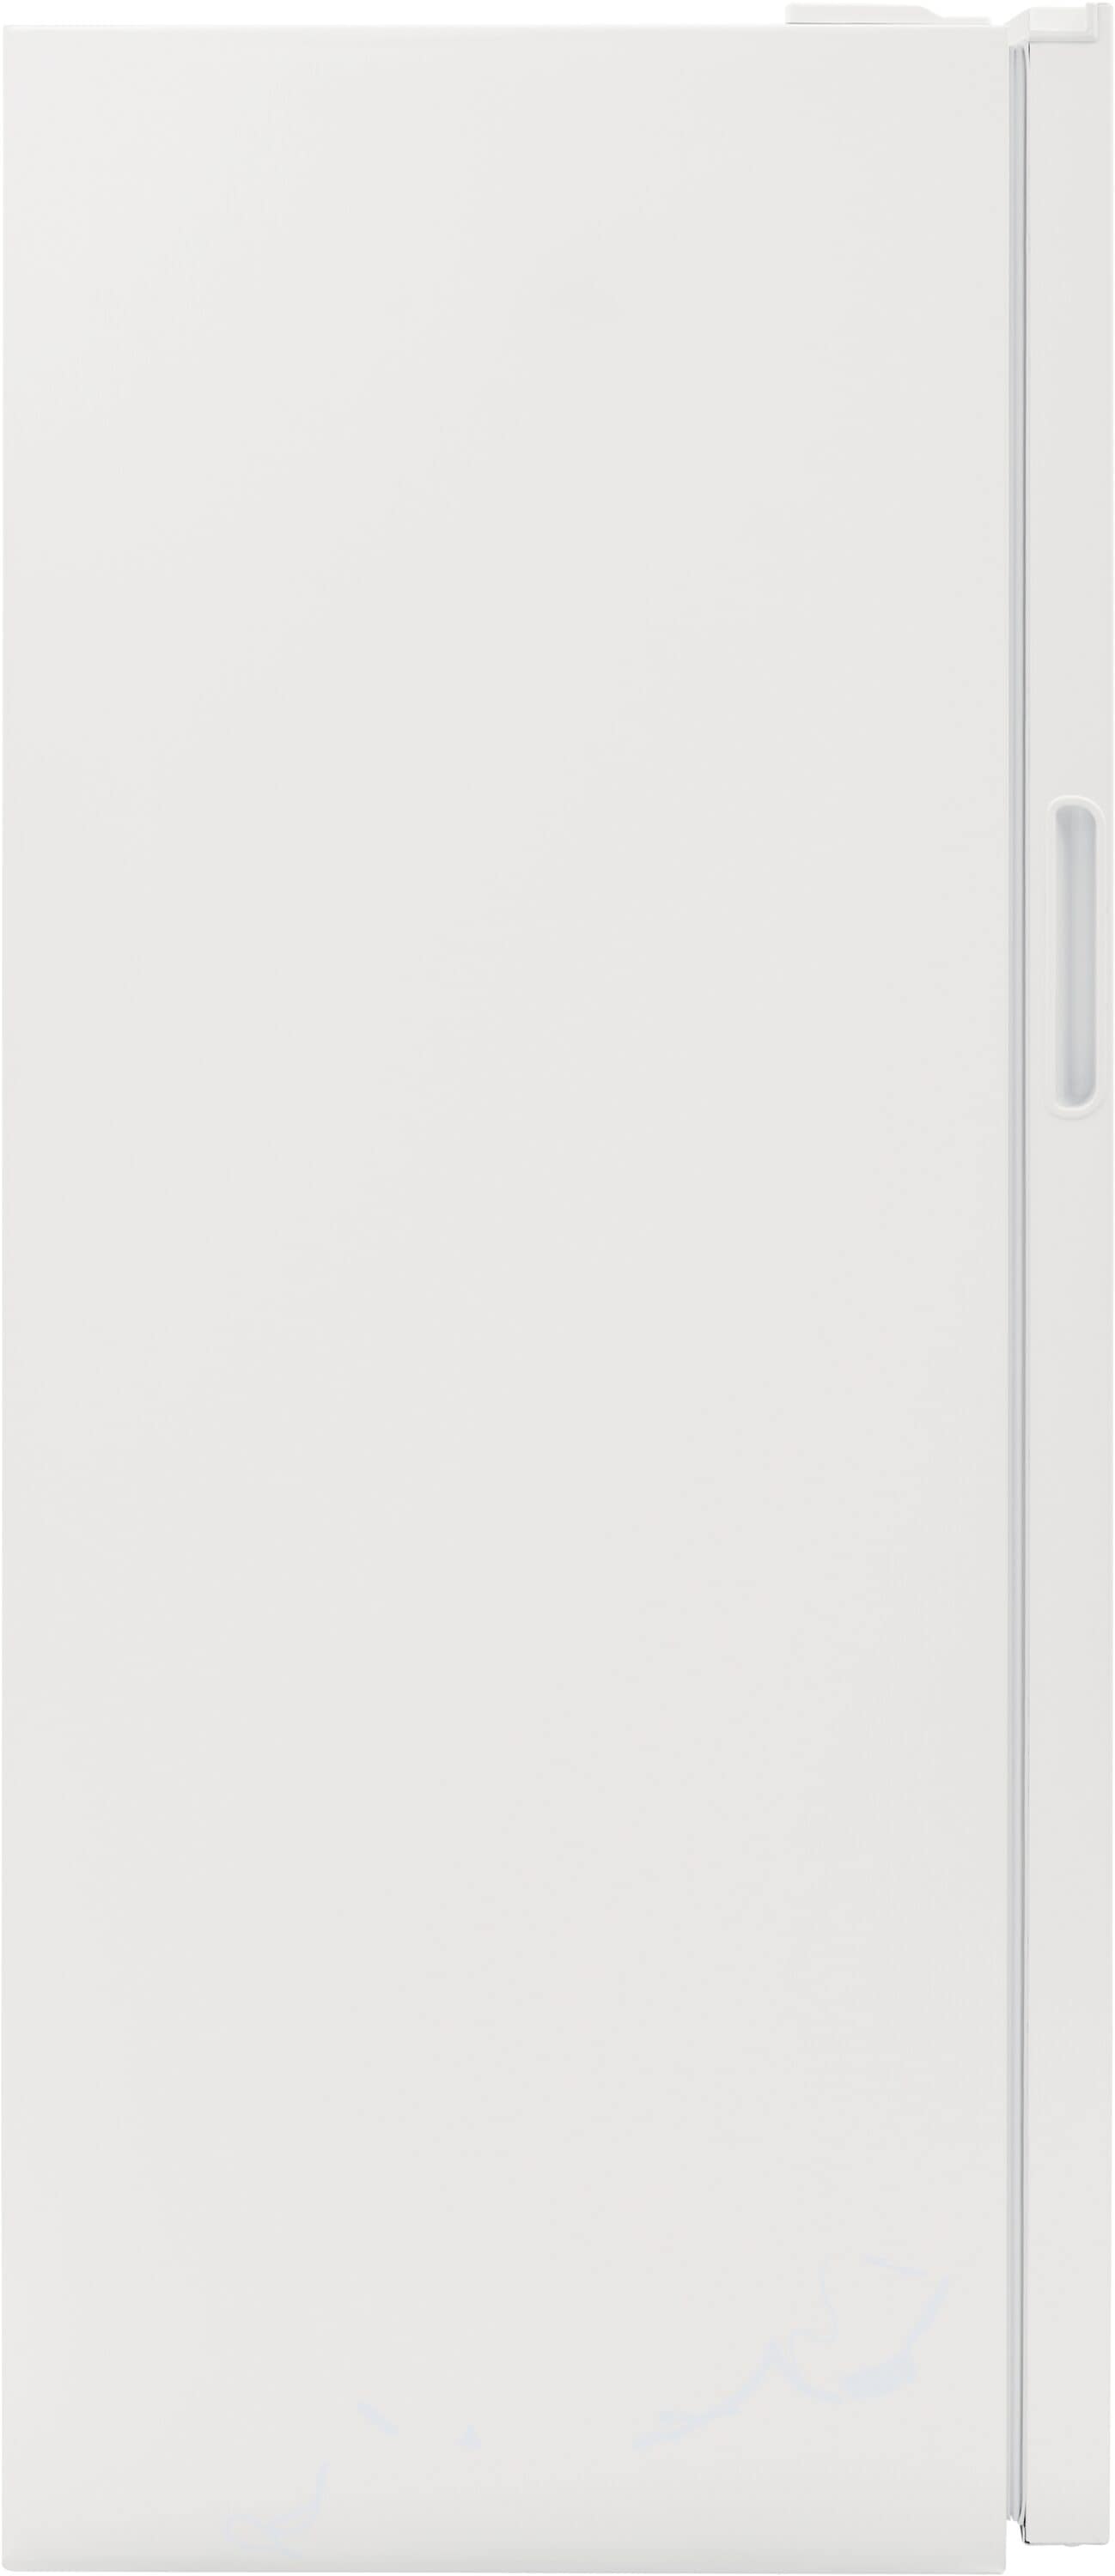 Buy upright freezer or small freezer? - Coolblue - Before 23:59, delivered  tomorrow